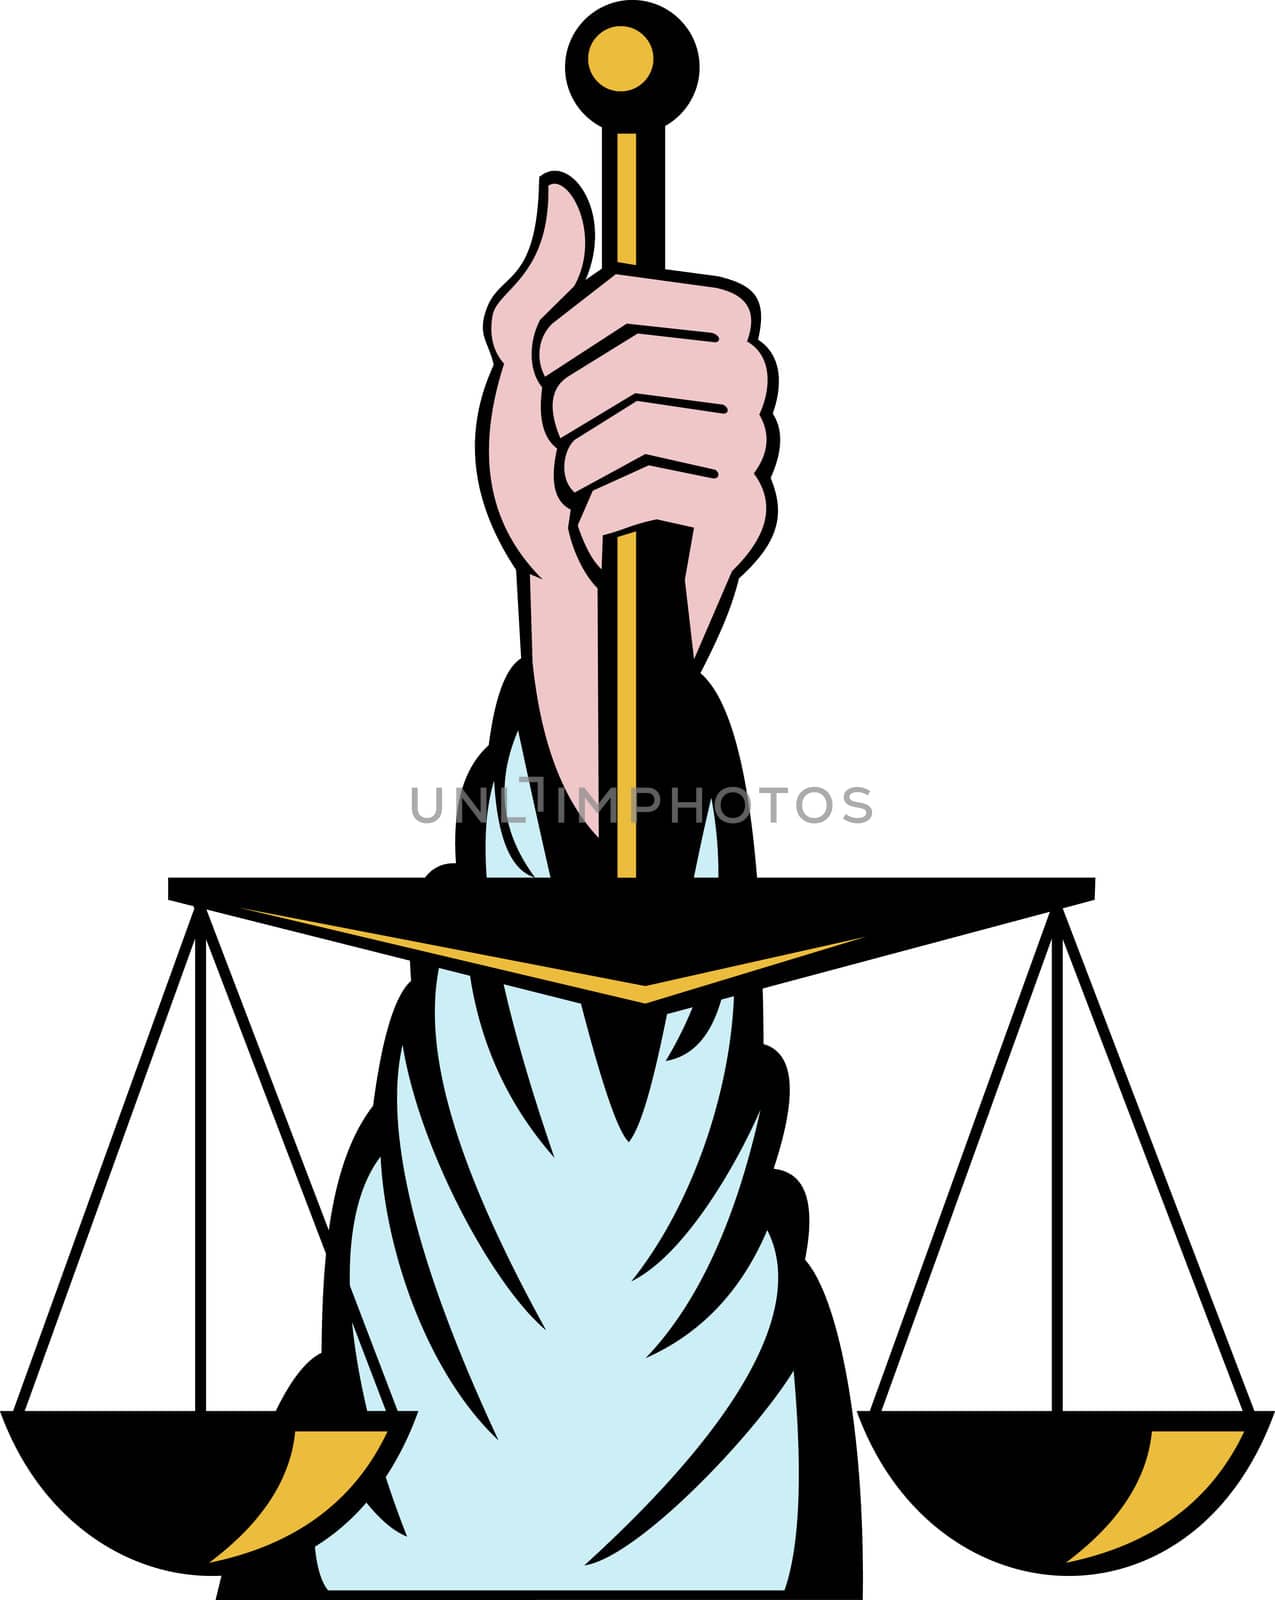 illustration of a Hand holding scales of justice isolated on white